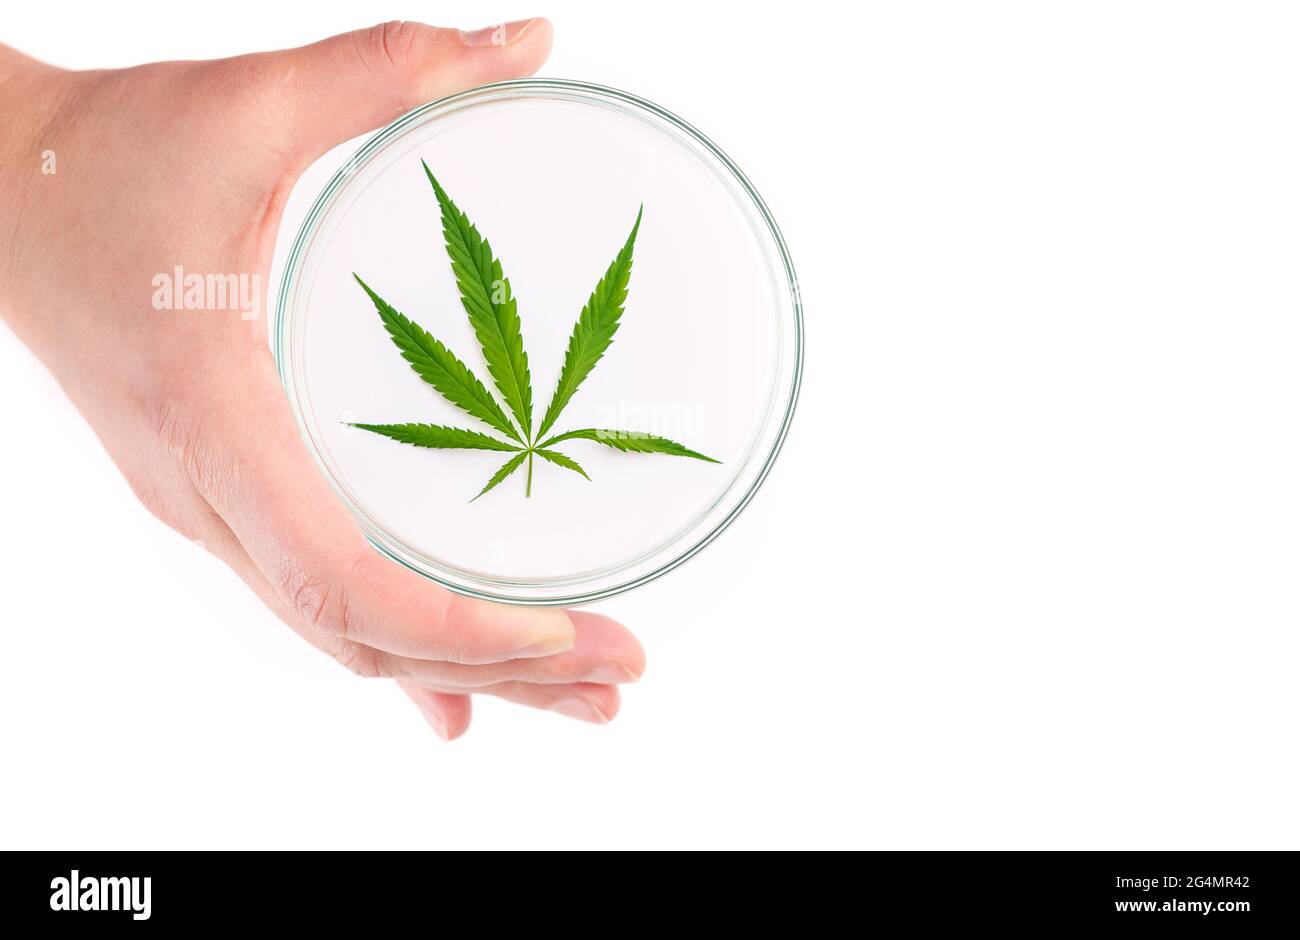 Marijuana cannabis leaf on a white background in a petri dish. Medicinal plant containing narcotic substances Stock Photo